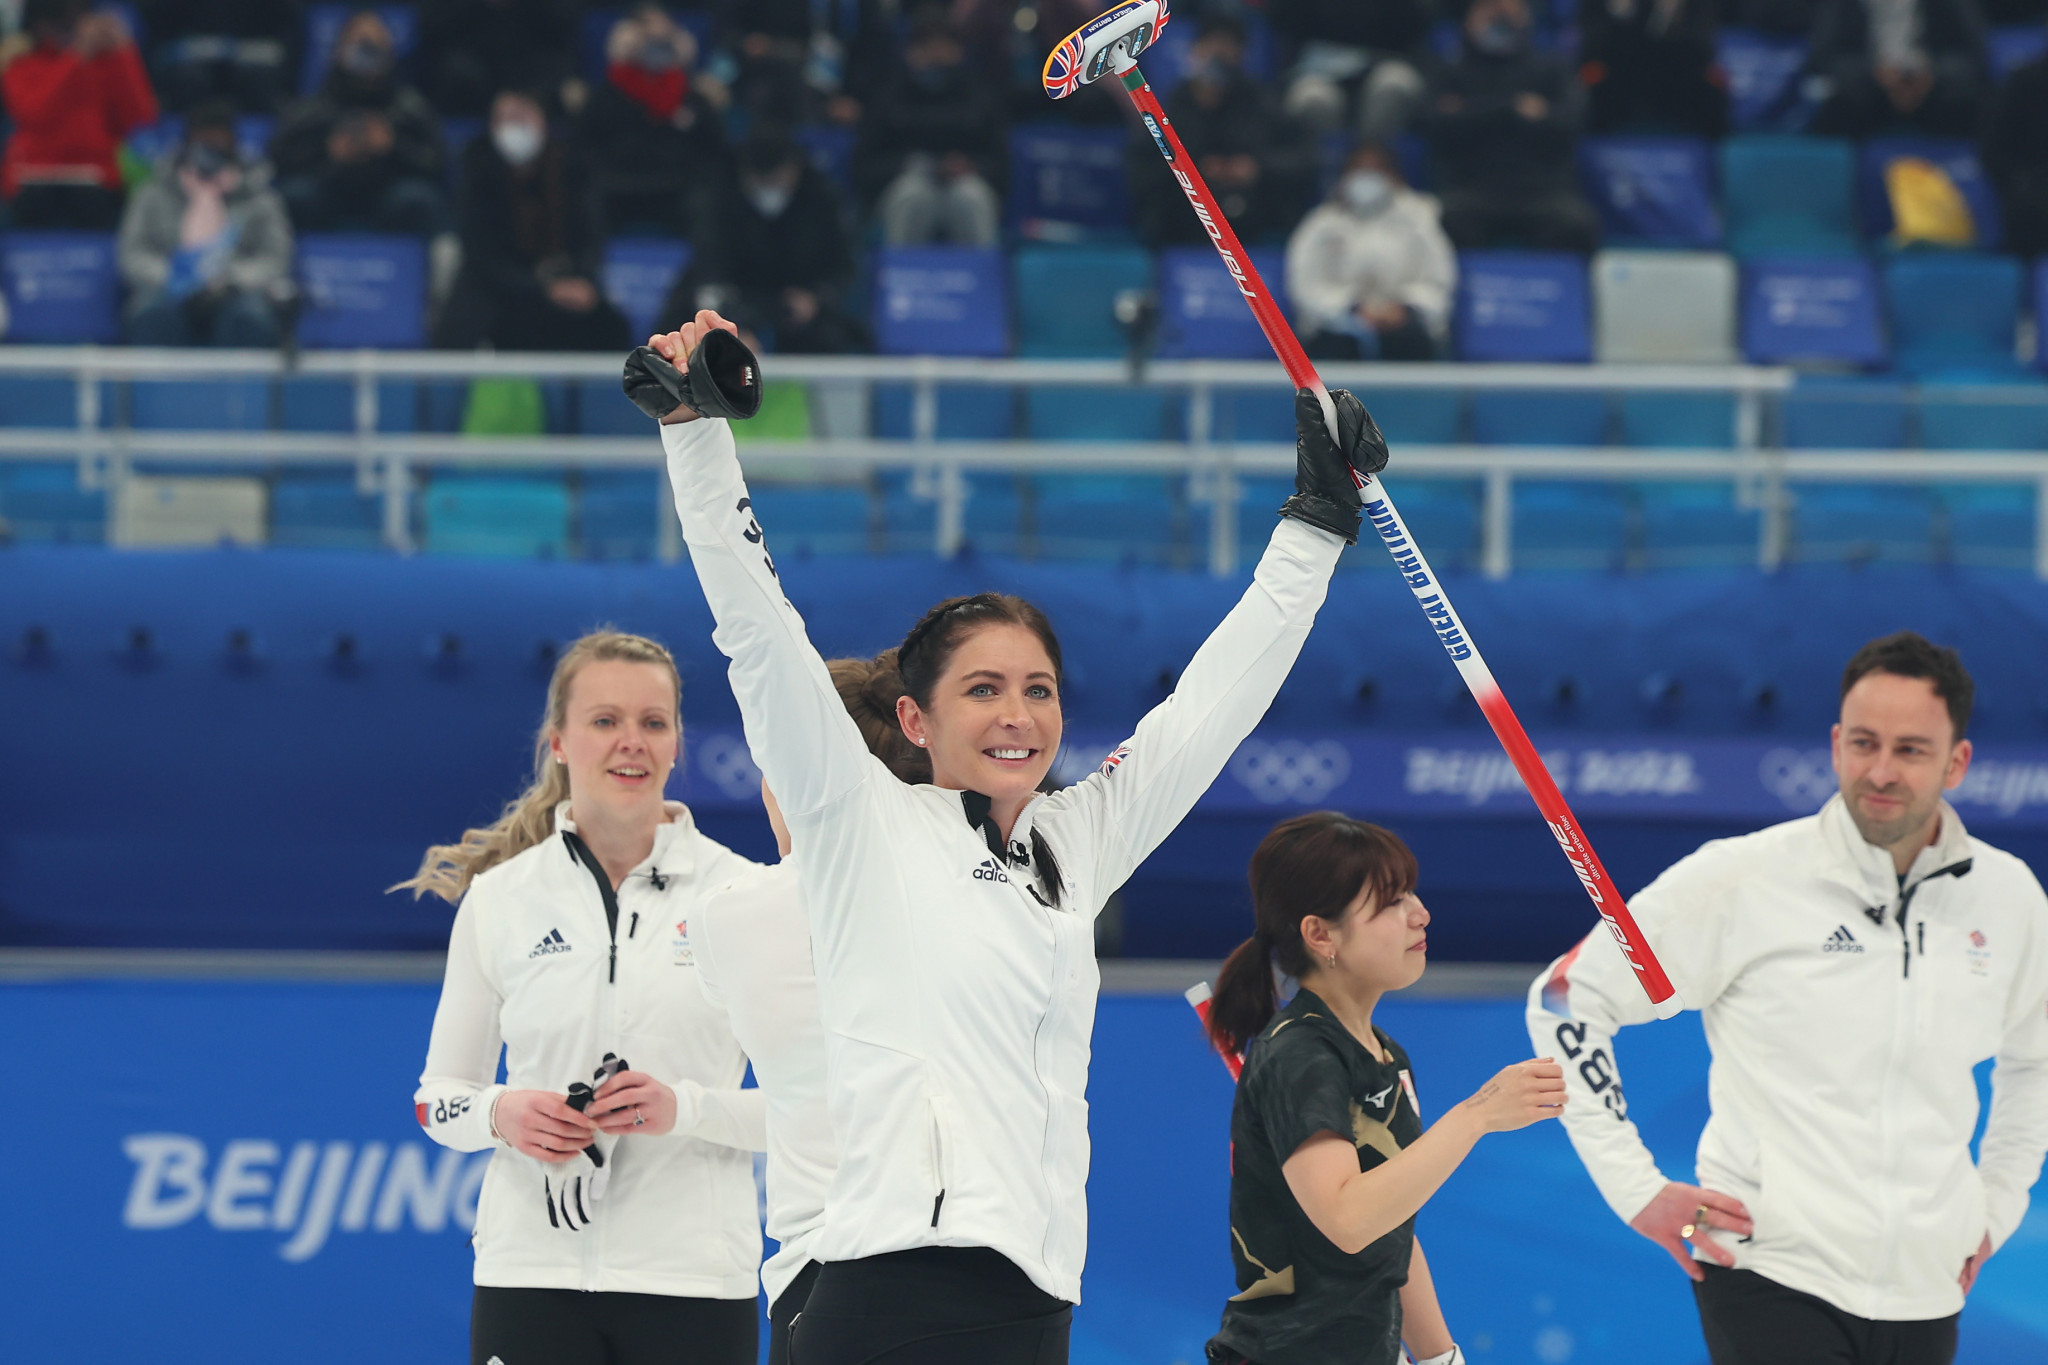 With Eve Muirhead retiring, Scotland looks for new skips to follow her success ©Getty Images